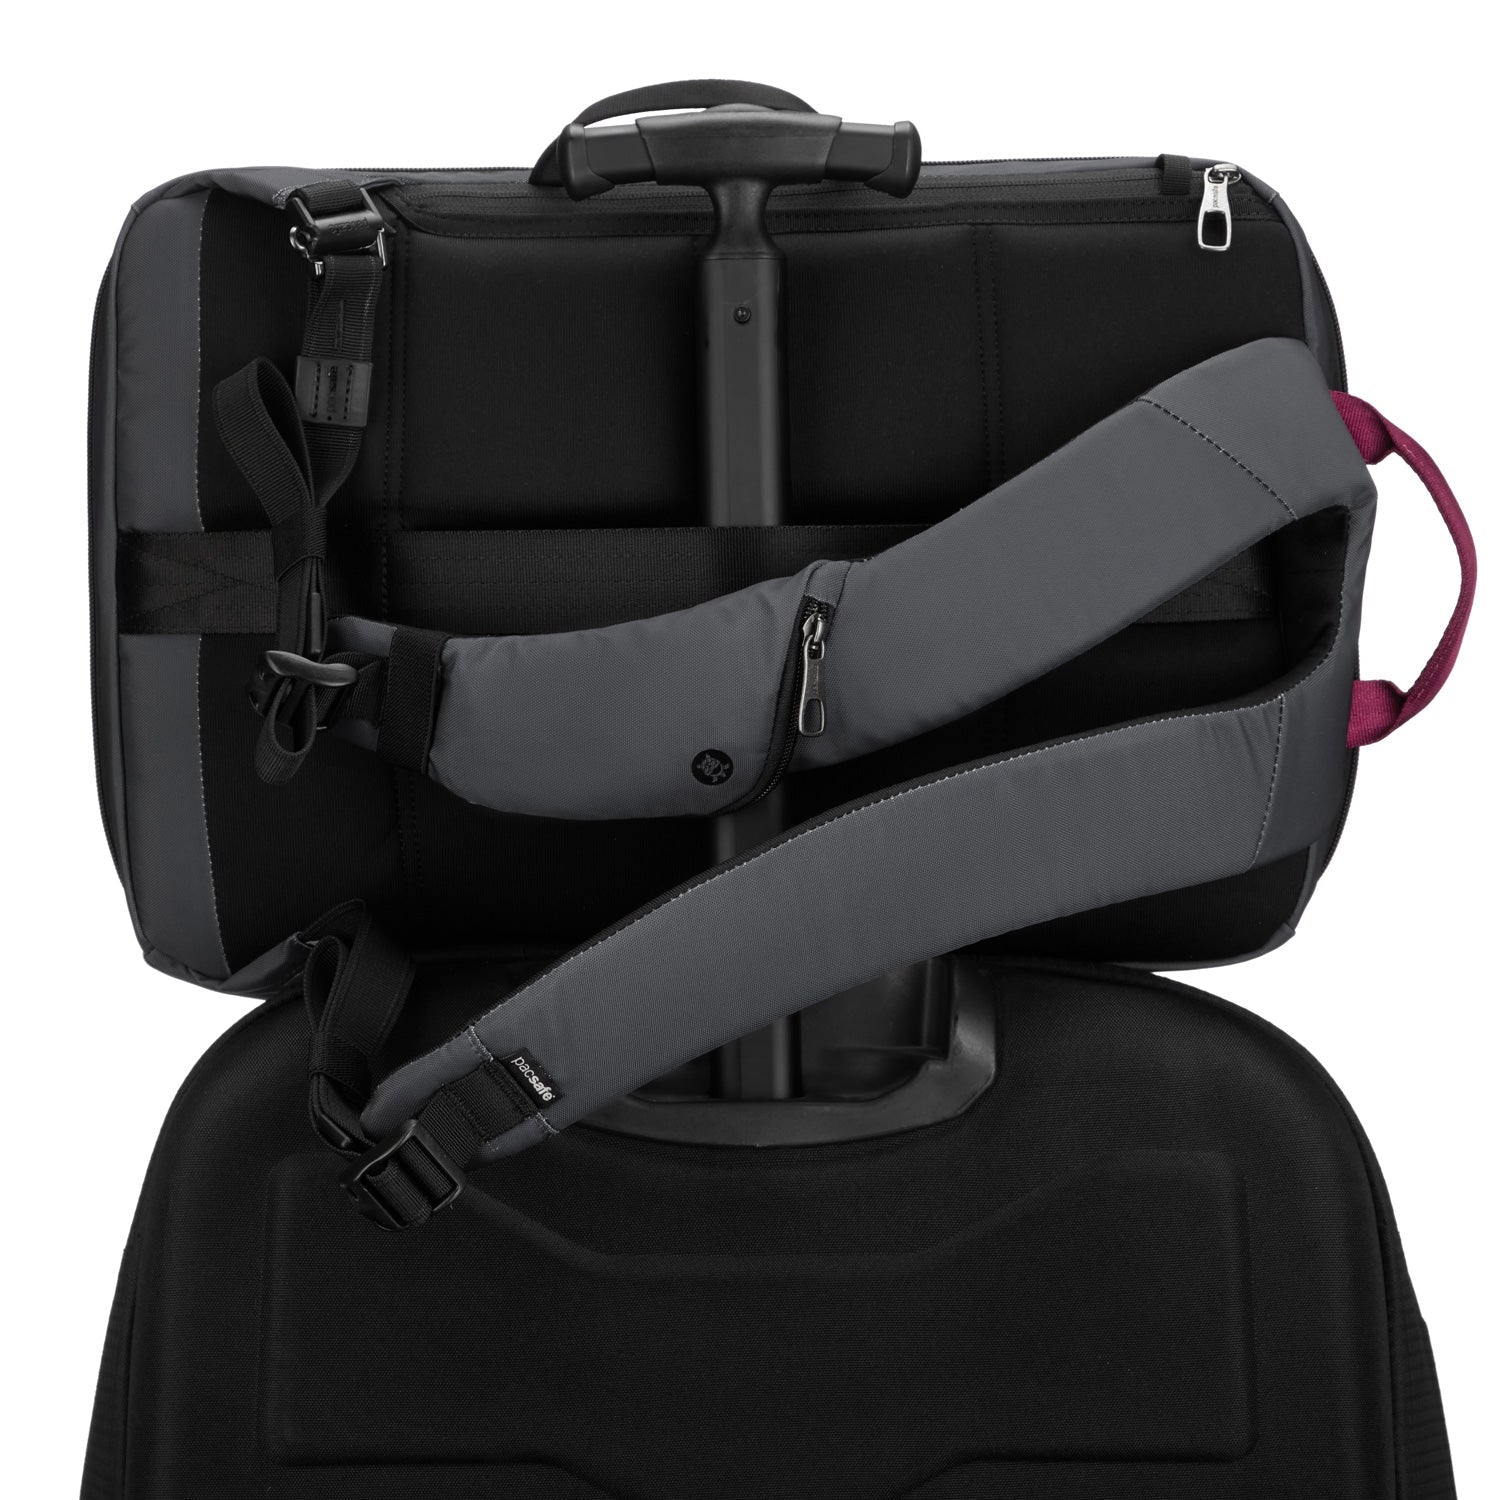 Lenovo ThinkPad Professional Backpack - notebook carrying backpack